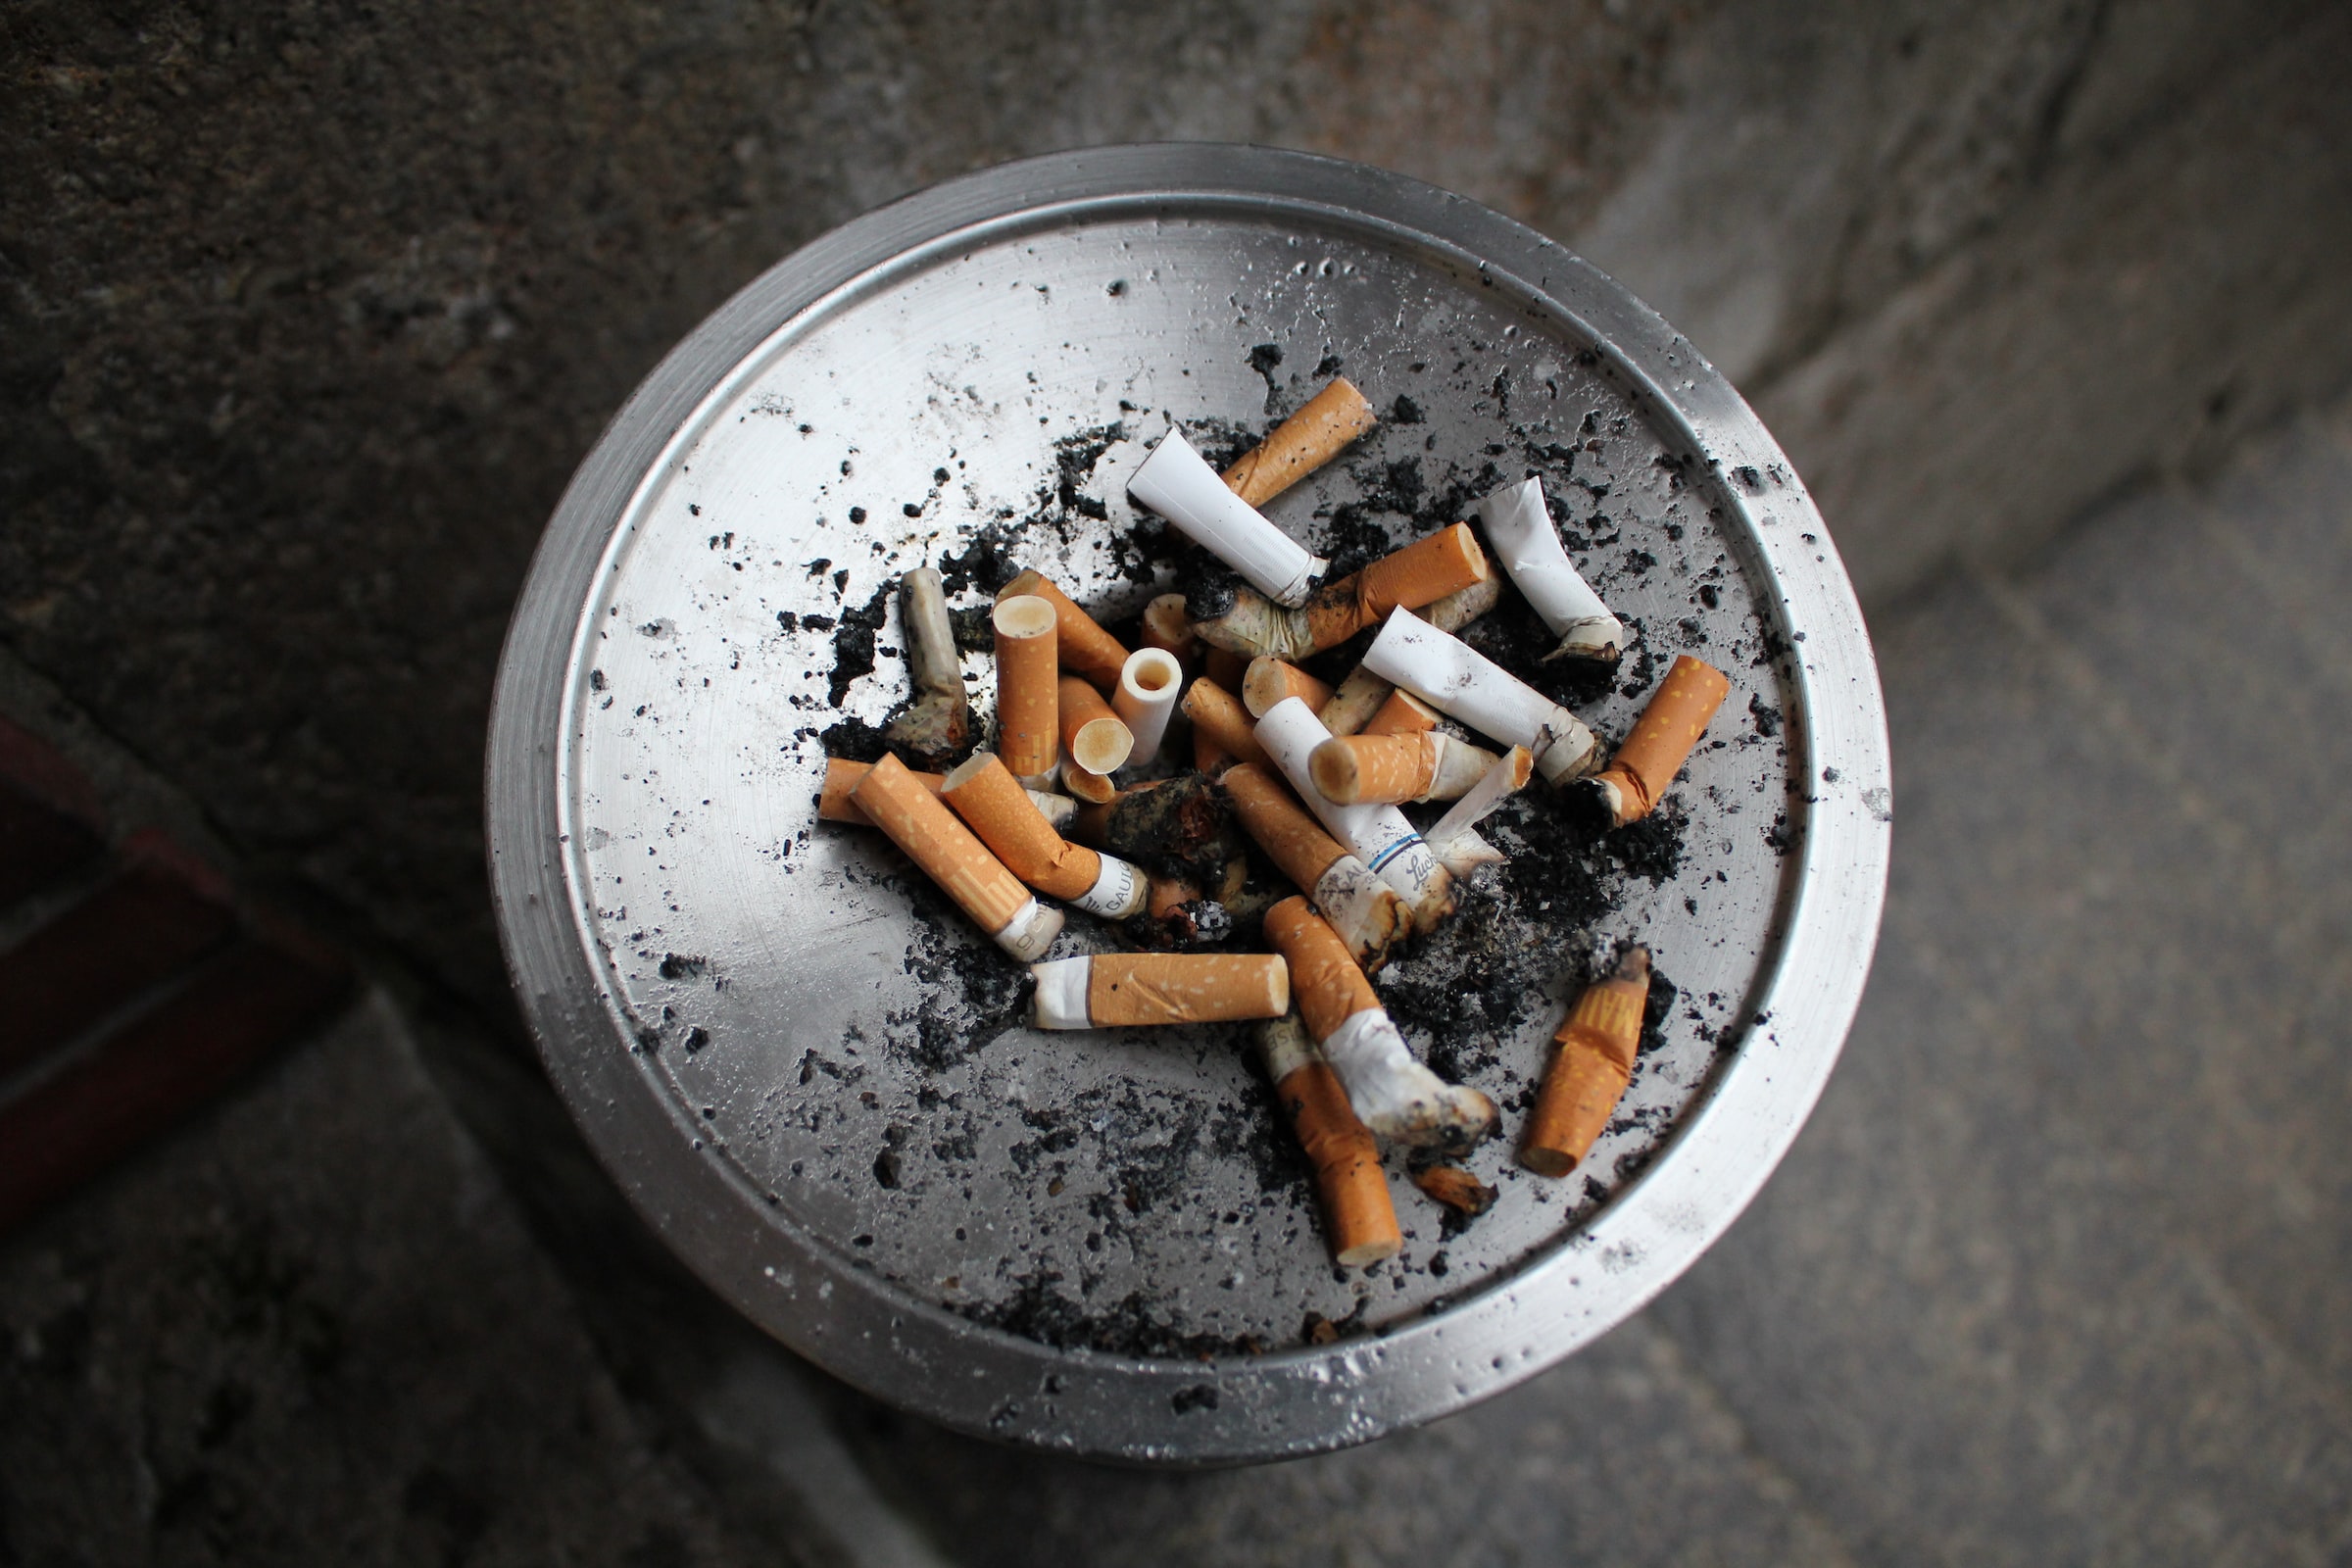 Bowl full of used cigarettes